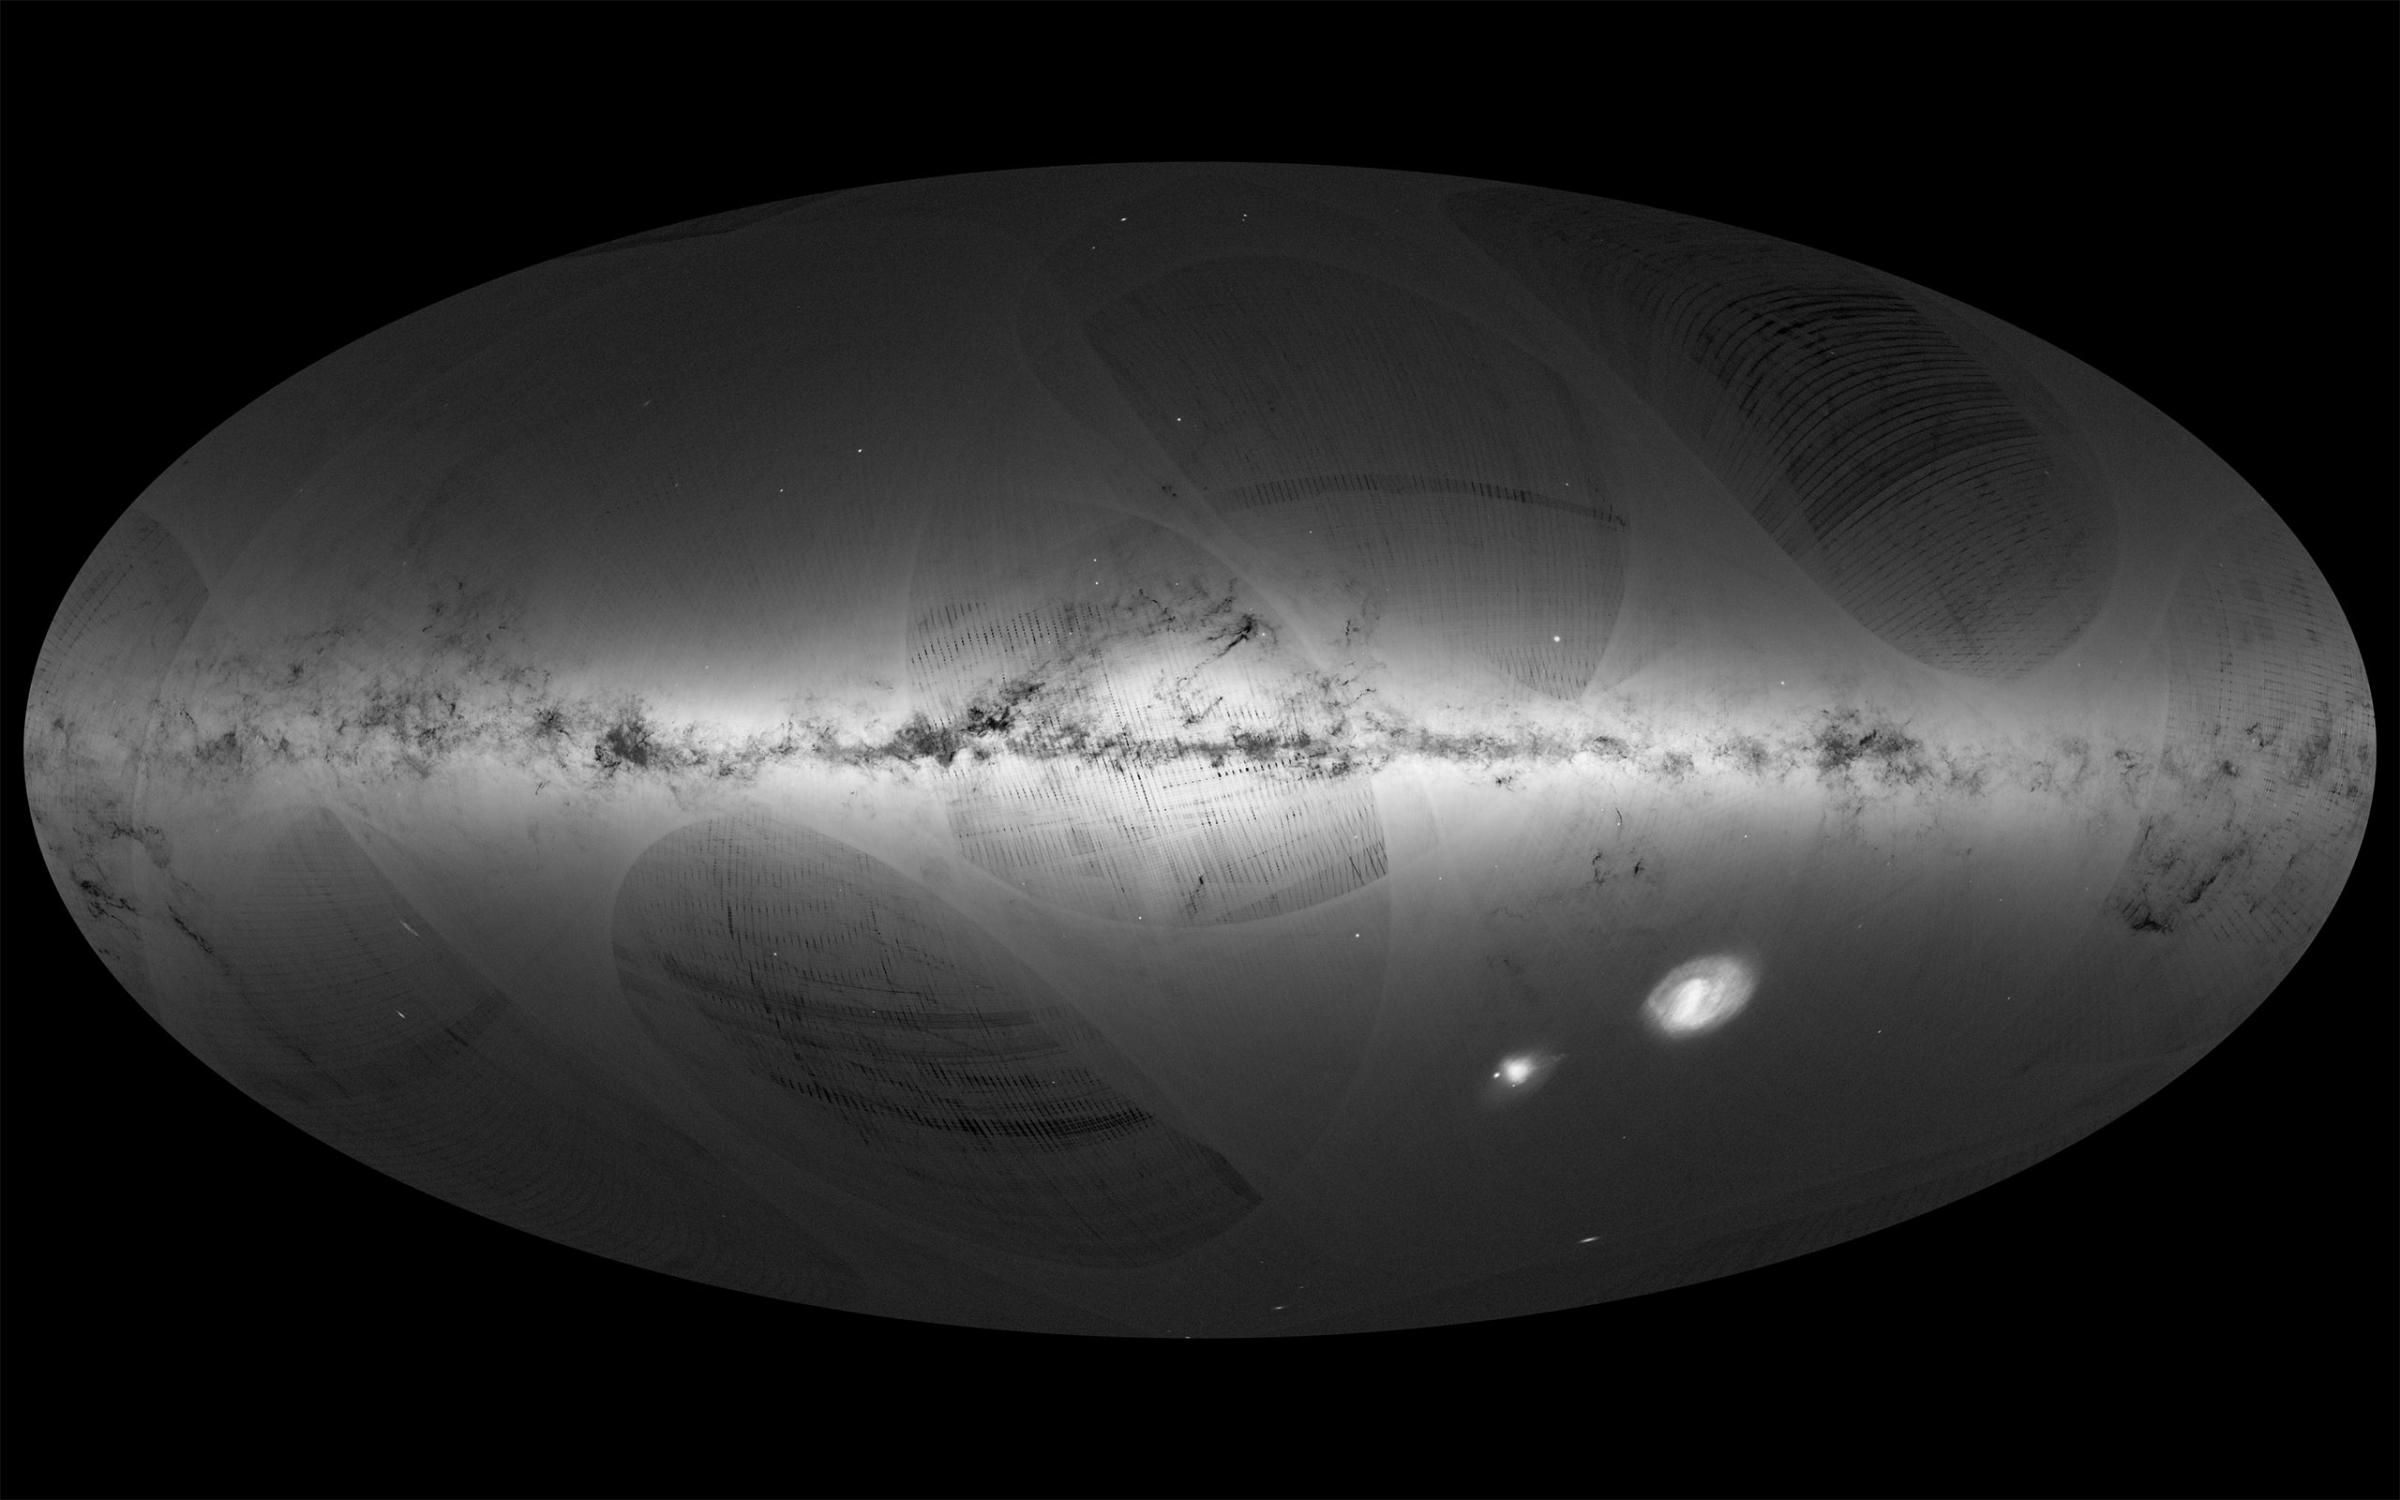 An all-sky view of stars in our Galaxy – the Milky Way – and neighboring galaxies, based on the first year of observations from ESA’s Gaia satellite, from July 2014 to Sept. 2015.